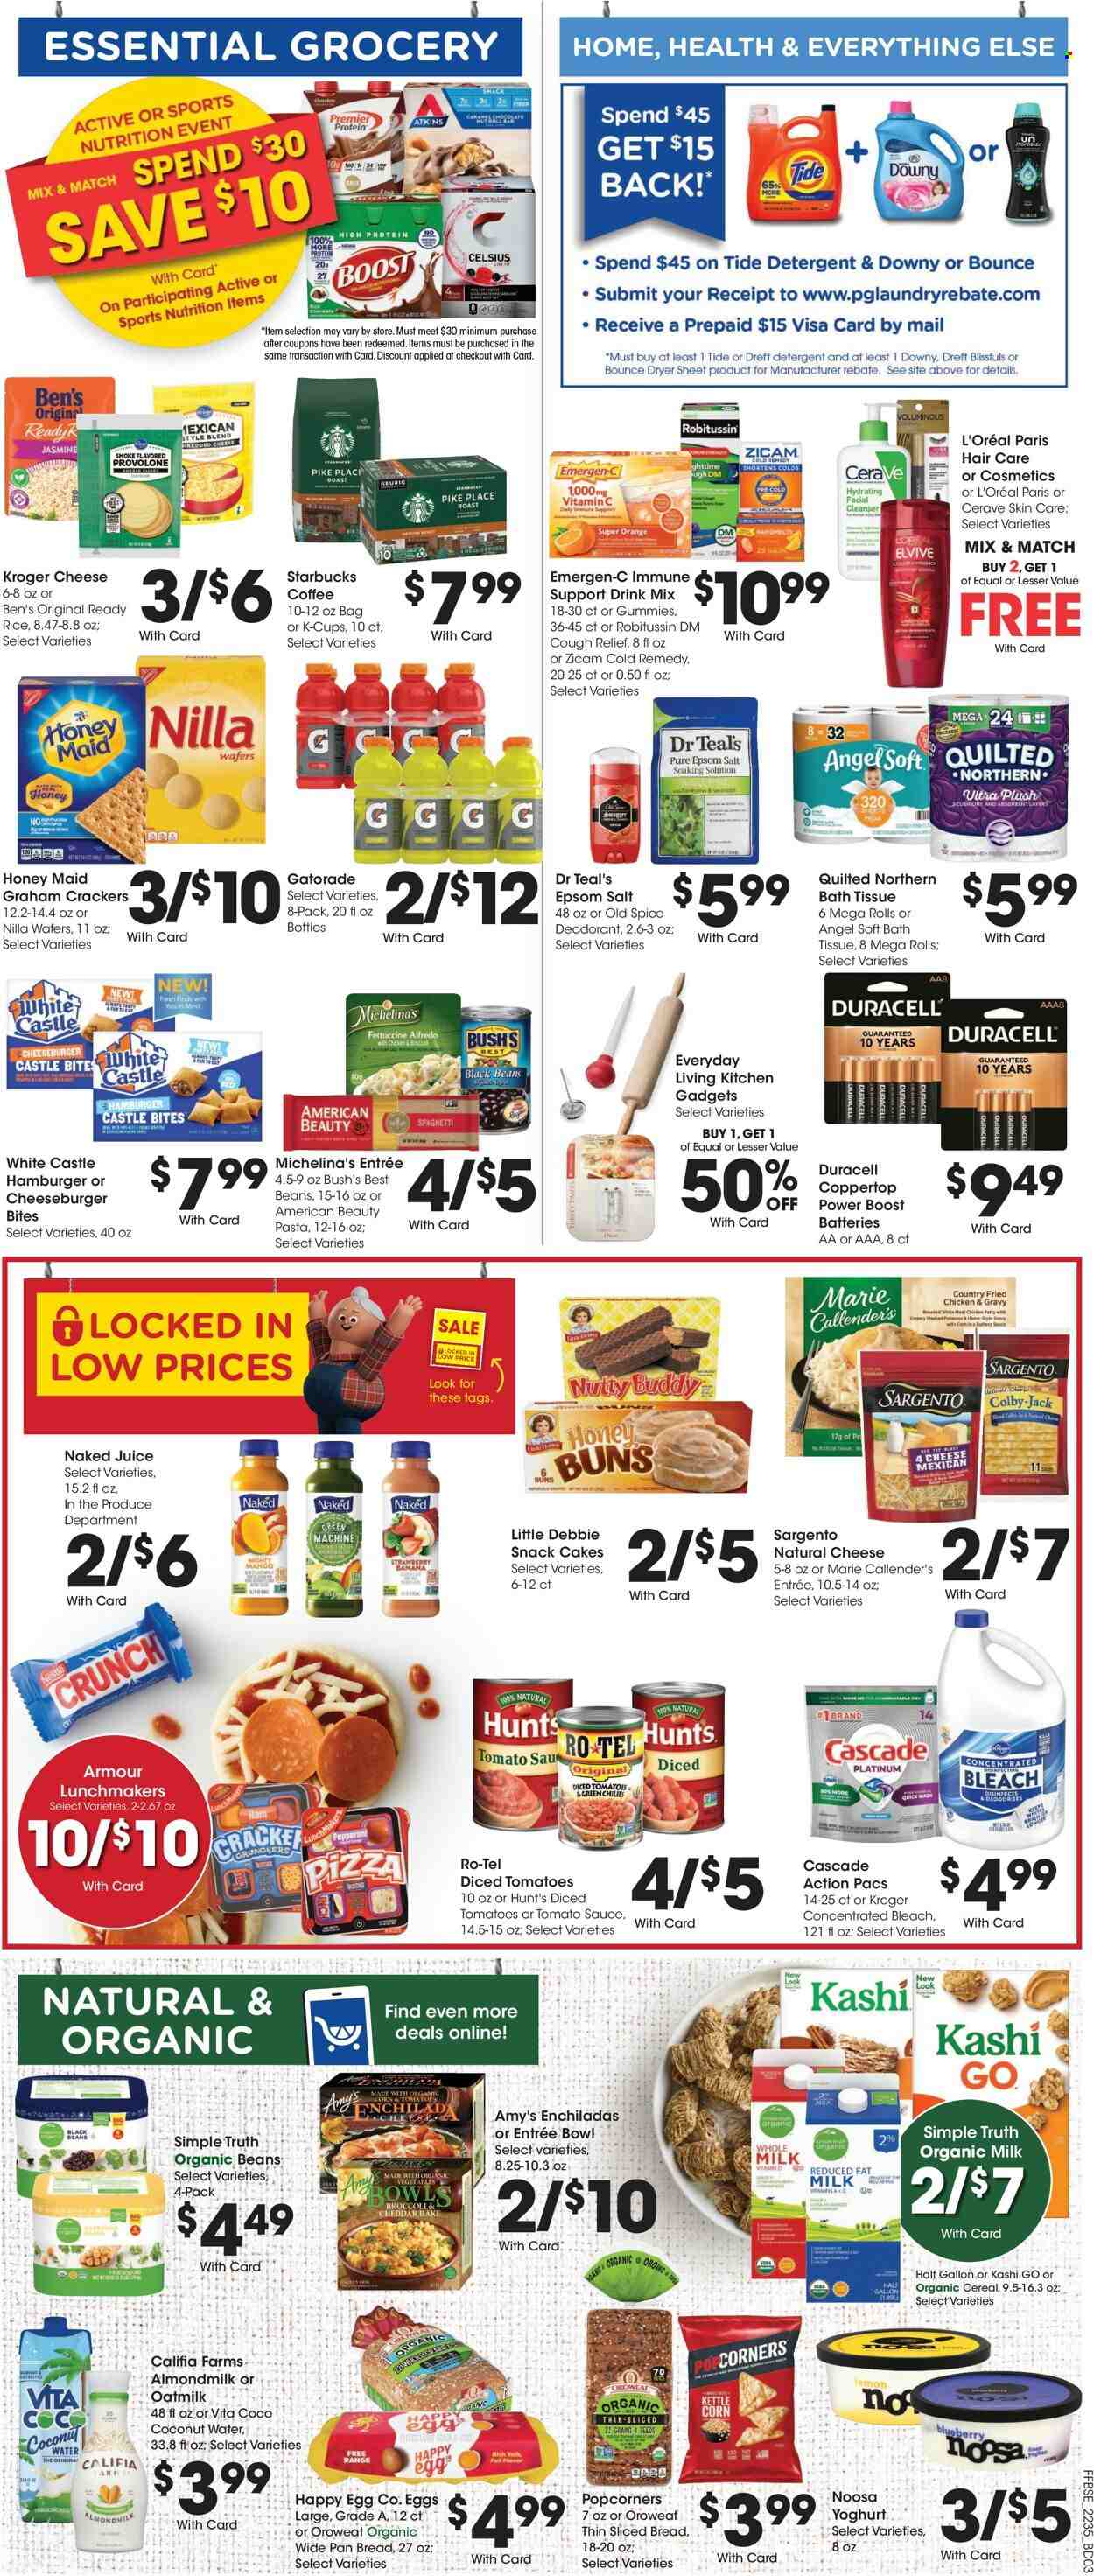 thumbnail - Fry’s Flyer - 09/28/2022 - 10/04/2022 - Sales products - cake, buns, oranges, enchiladas, spaghetti, hamburger, pasta, cheeseburger, fried chicken, Marie Callender's, Colby cheese, cheddar, cheese, Provolone, Sargento, yoghurt, almond milk, organic milk, oat milk, eggs, graham crackers, Nestlé, wafers, snack, crackers, kettle corn, popcorn, black beans, tomato sauce, diced tomatoes, cereals, Honey Maid, rice, spice, juice, coconut water, Gatorade, Boost, coffee, Starbucks, coffee capsules, K-Cups, Keurig, Castle, bath tissue, Quilted Northern, detergent, bleach, Cascade, Tide, Bounce, Old Spice, CeraVe, cleanser, L’Oréal, anti-perspirant, deodorant, pan, bowl, battery, Duracell, Robitussin, vitamin c, Emergen-C. Page 6.